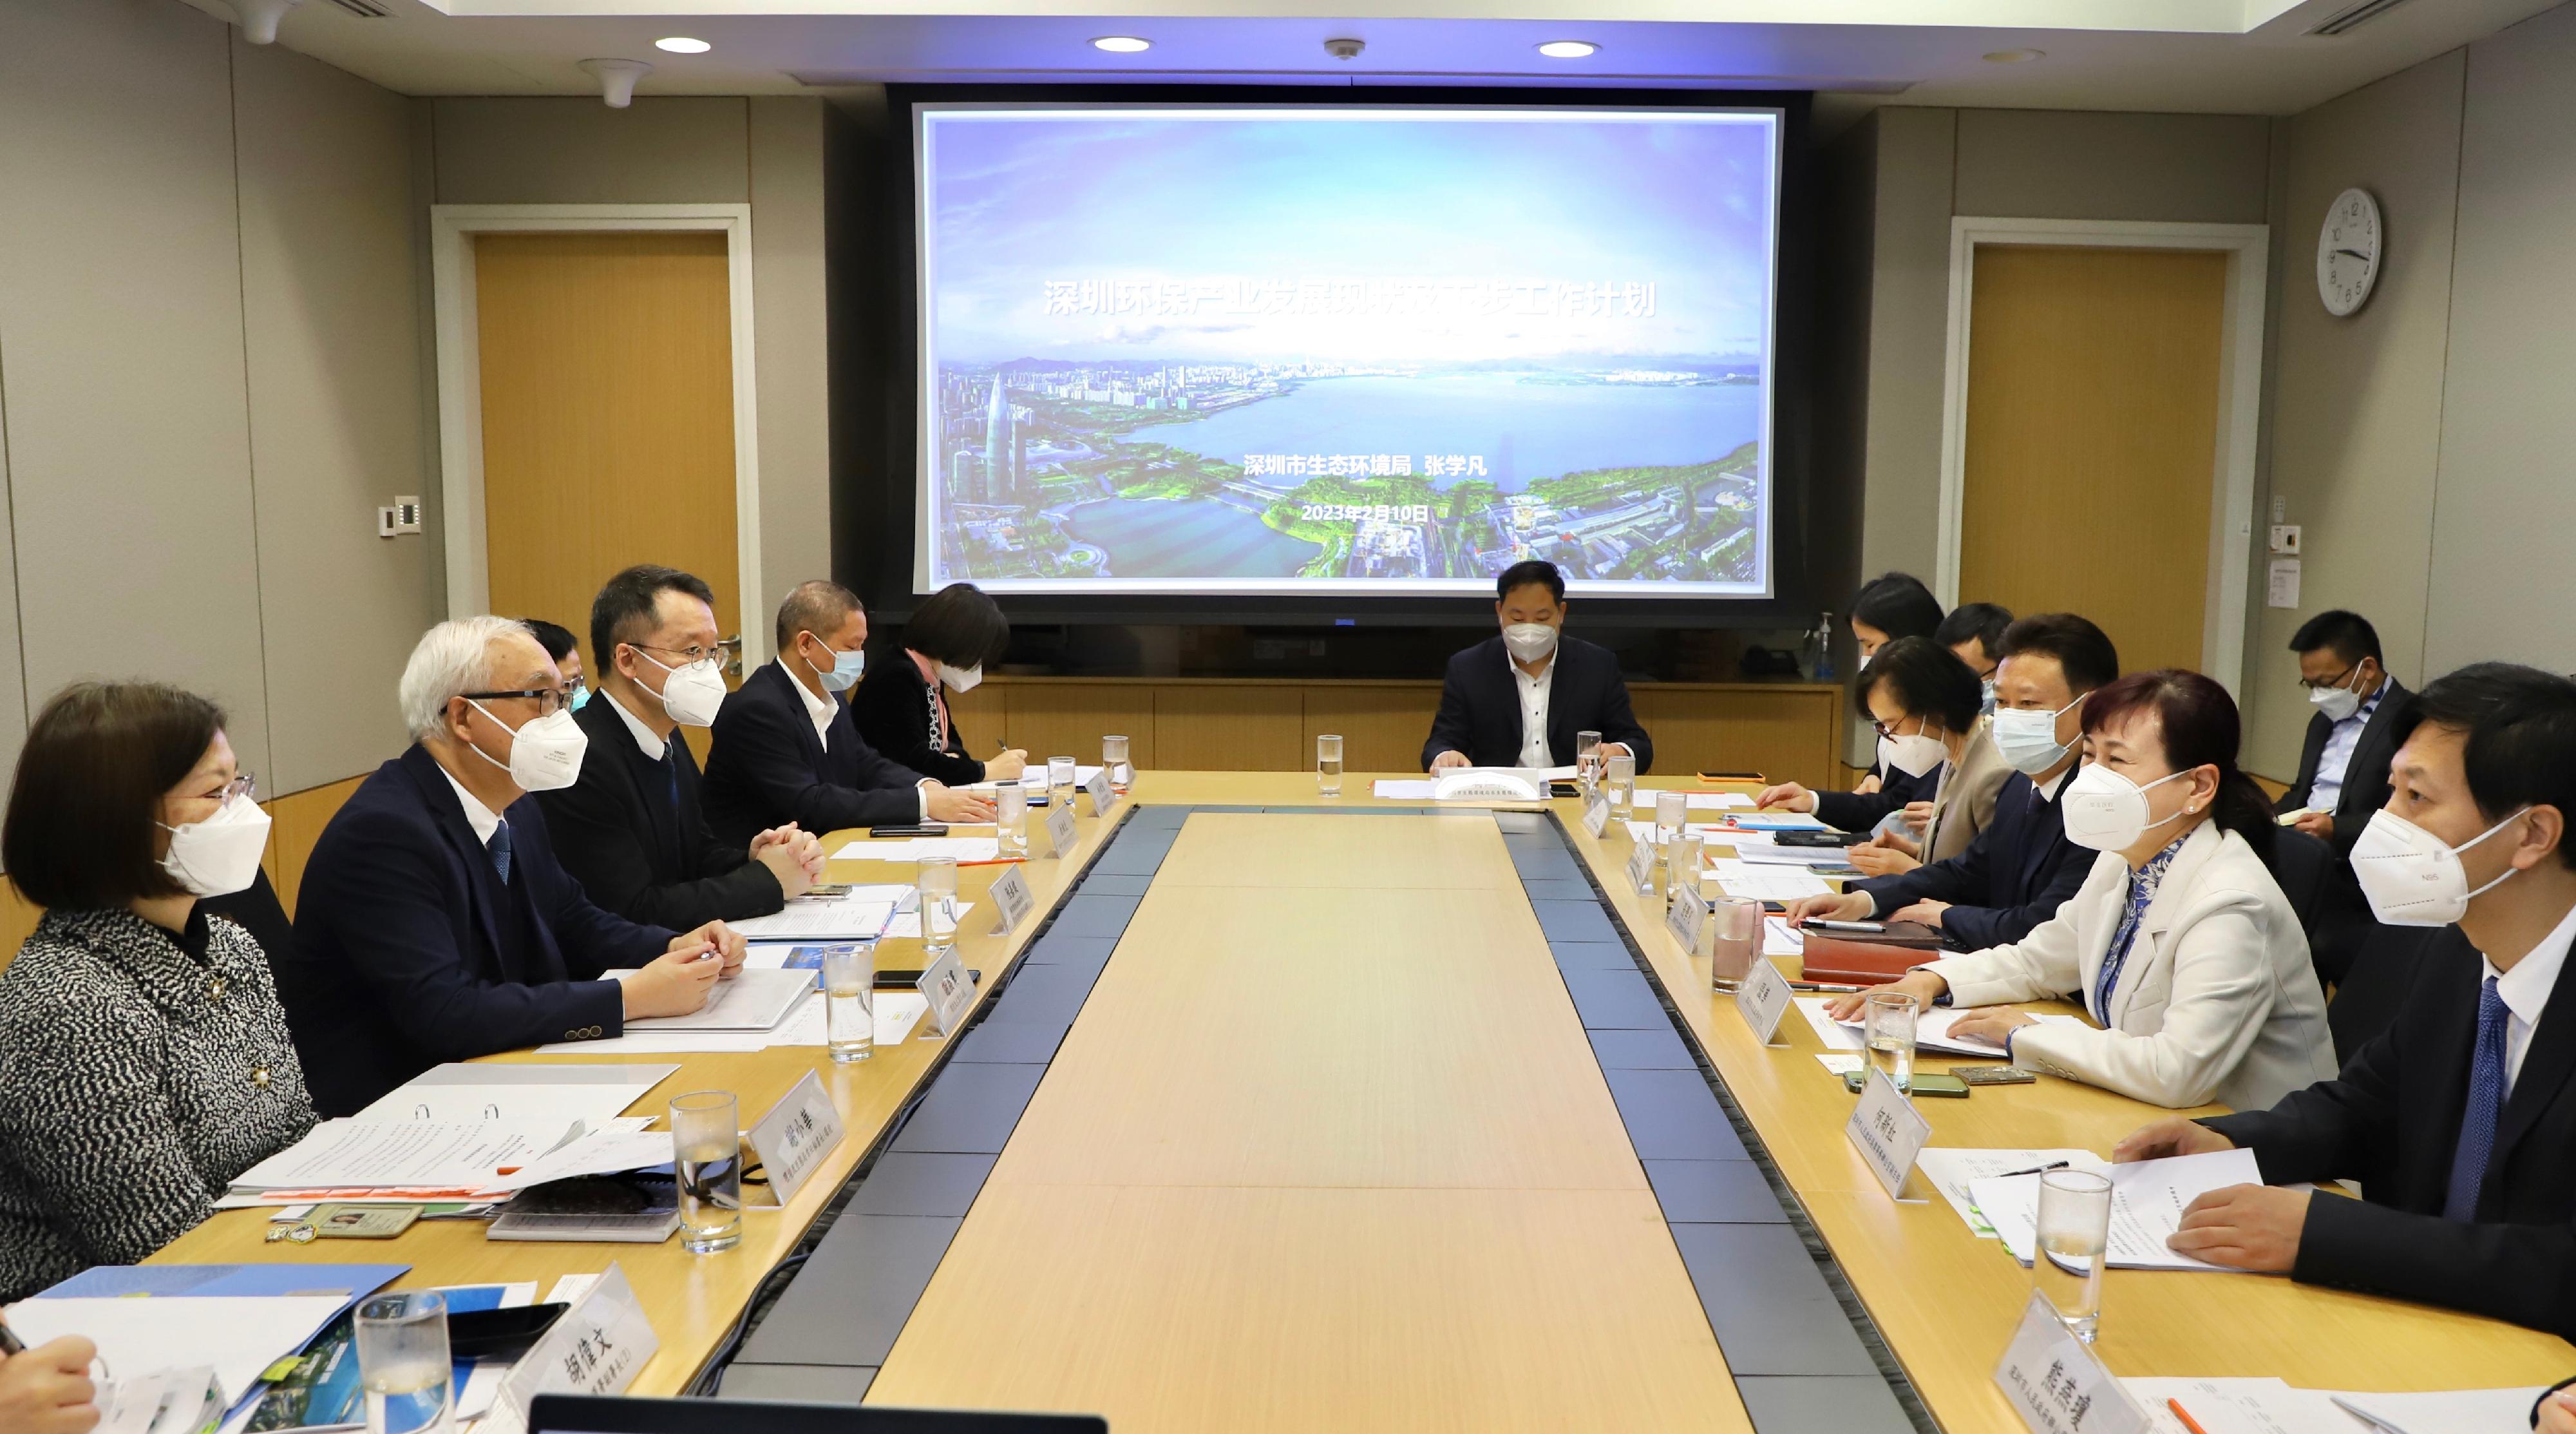 The Secretary for Environment and Ecology, Mr Tse Chin-wan (second left), today (February 10) met with Vice Mayor of Shenzhen Municipal People's Government Ms Zhang Hua (second right) and officials from the General Office and Hong Kong and Macao Affairs Office of Shenzhen Government as well as the Ecology Environment Bureau of Shenzhen Municipality. They exchanged views on environmental industry co-operation between Shenzhen and Hong Kong, and also the planning, construction and operation of waste management facilities. The Permanent Secretary for Environment and Ecology (Environment), Miss Janice Tse (first left), also joined the meeting.